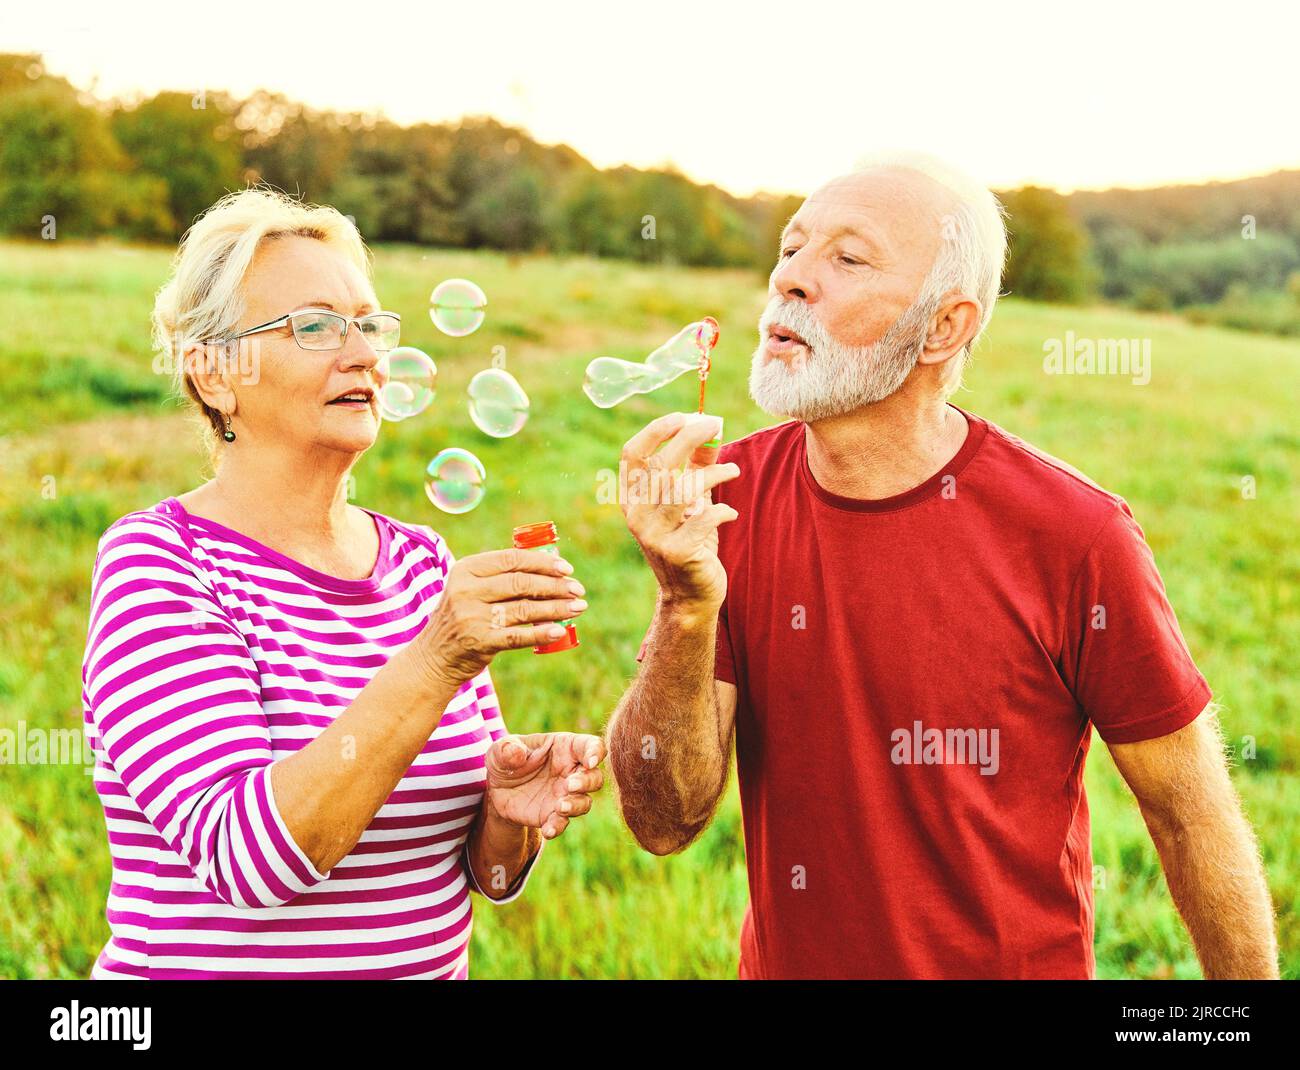 woman man outdoor senior couple happy fun retirement together bubble soap blowing love old nature mature Stock Photo